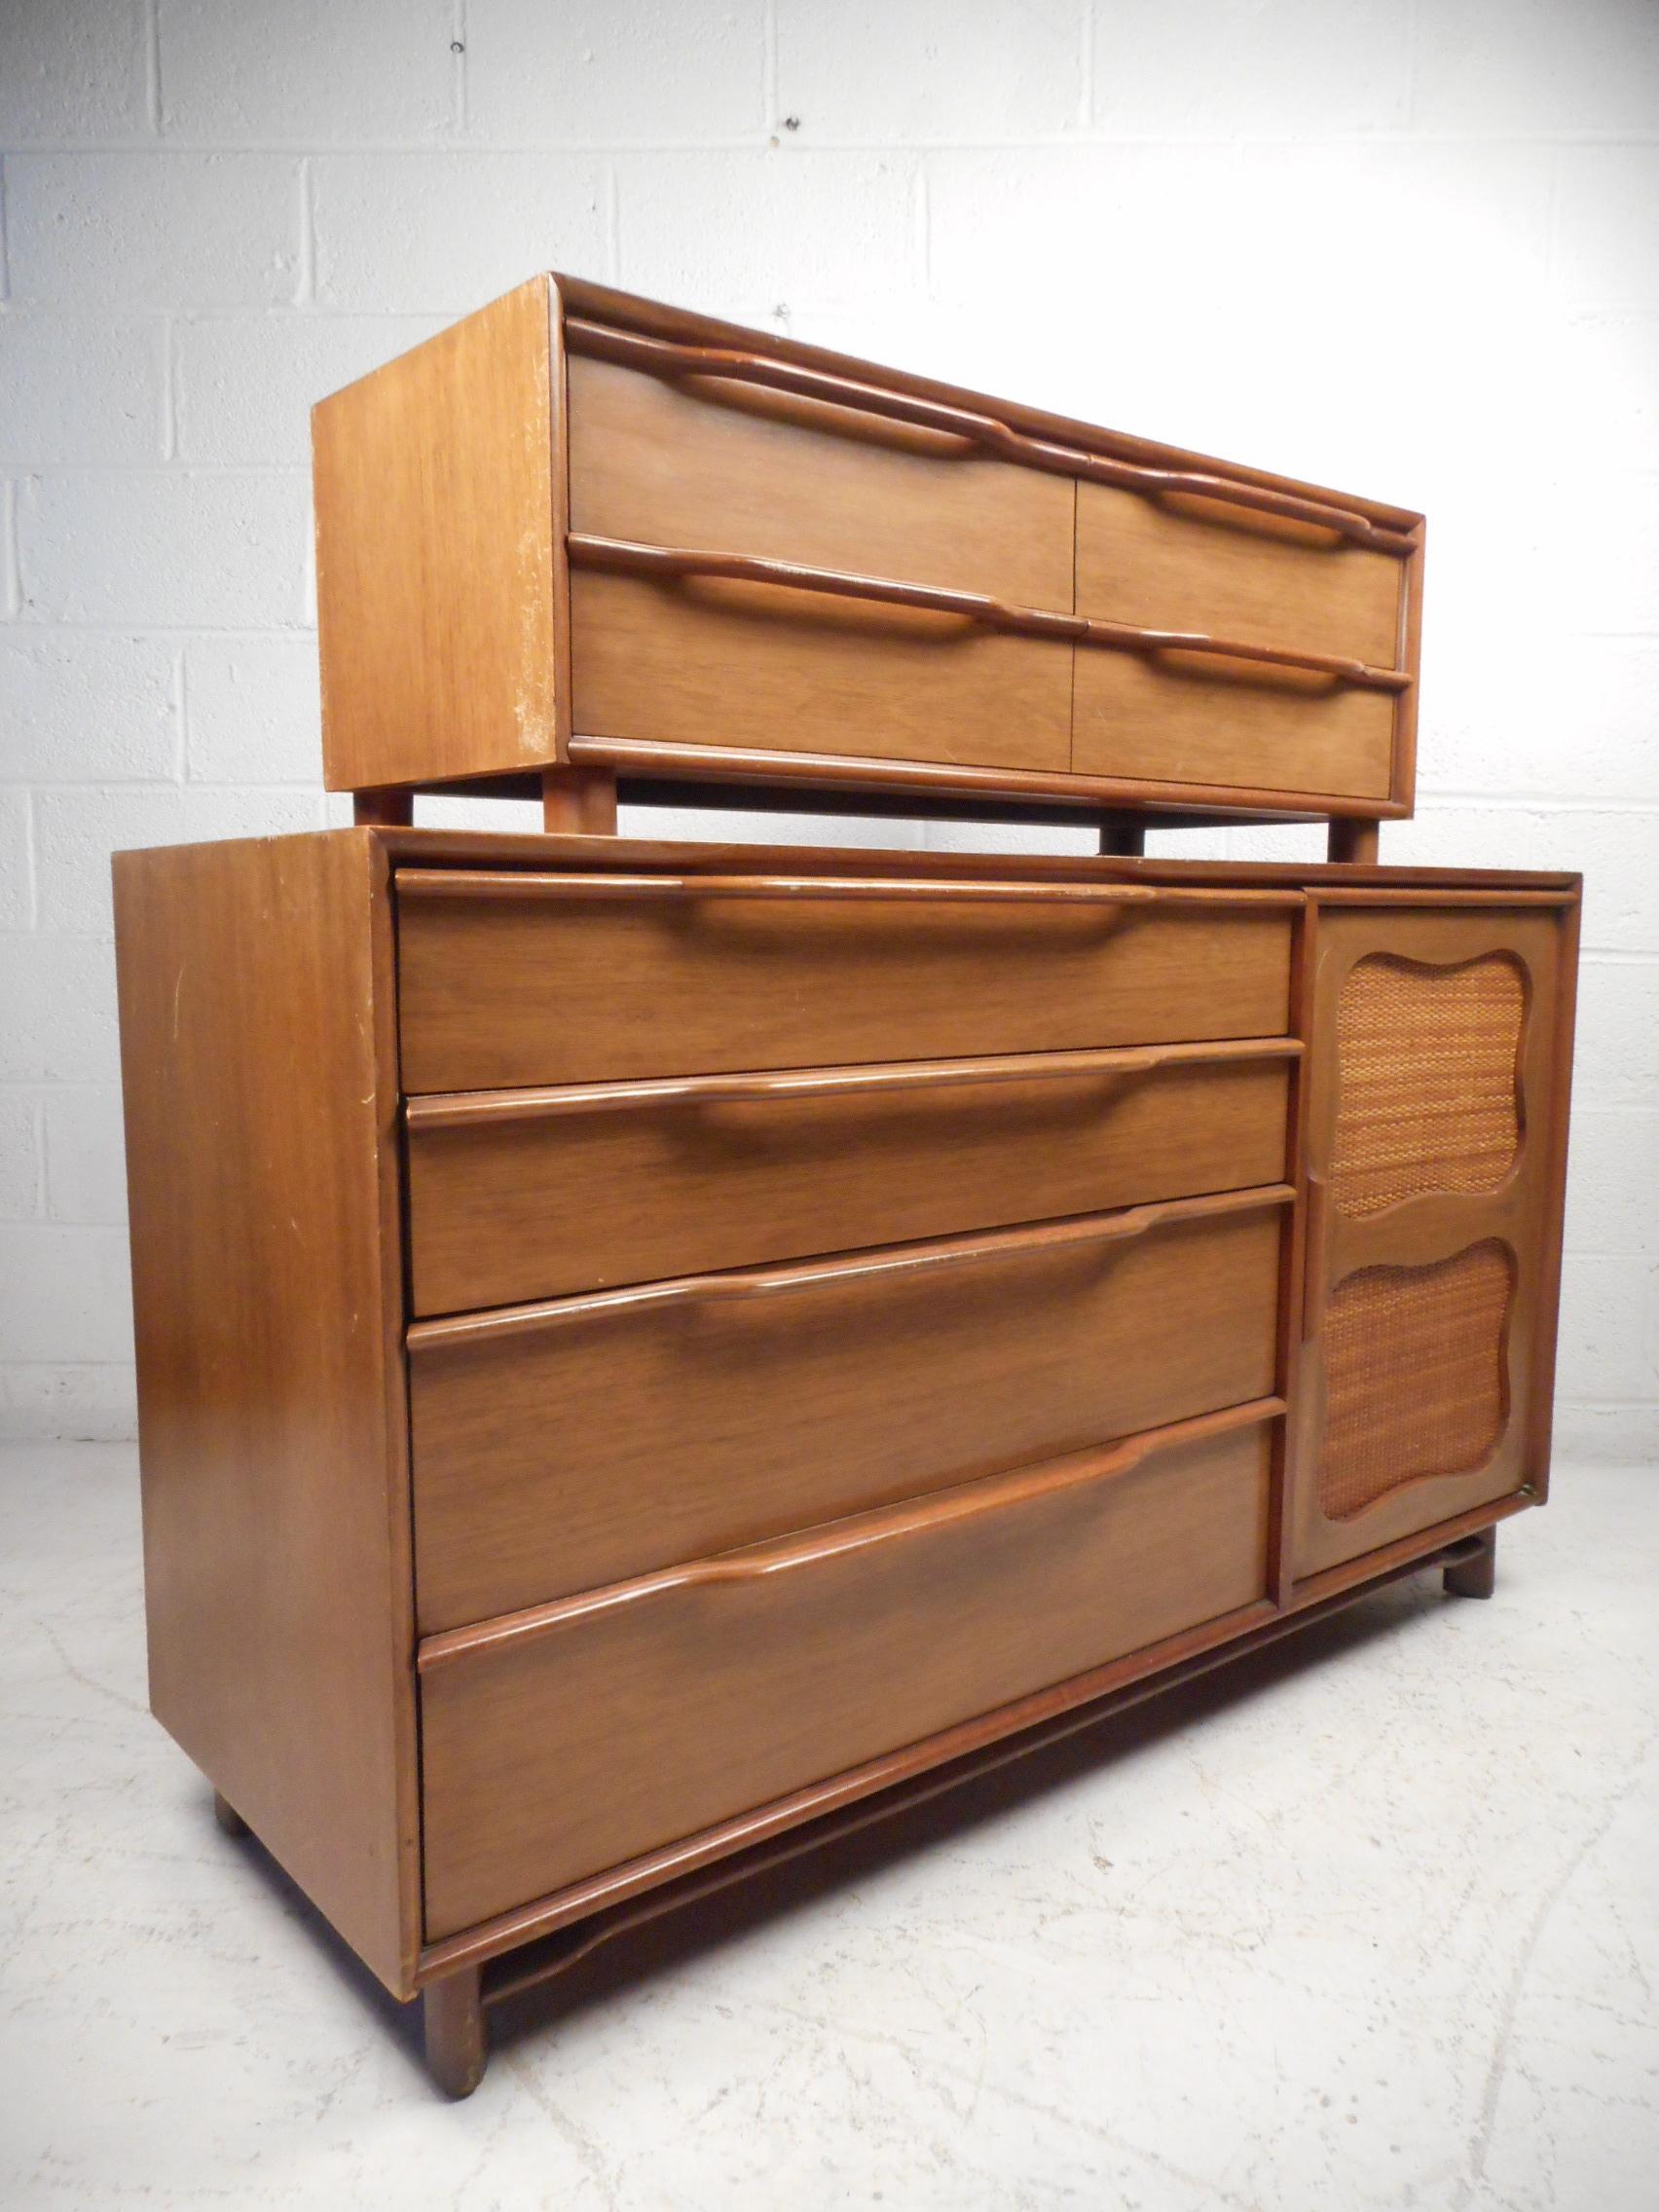 Uniquely well-crafted midcentury credenza with a topper chest, by Hickory, circa 1960s. Sturdy mahogany construction. A stylish design featuring handsome sculpted drawer pulls on spacious dovetail jointed drawers, and two well-preserved cane